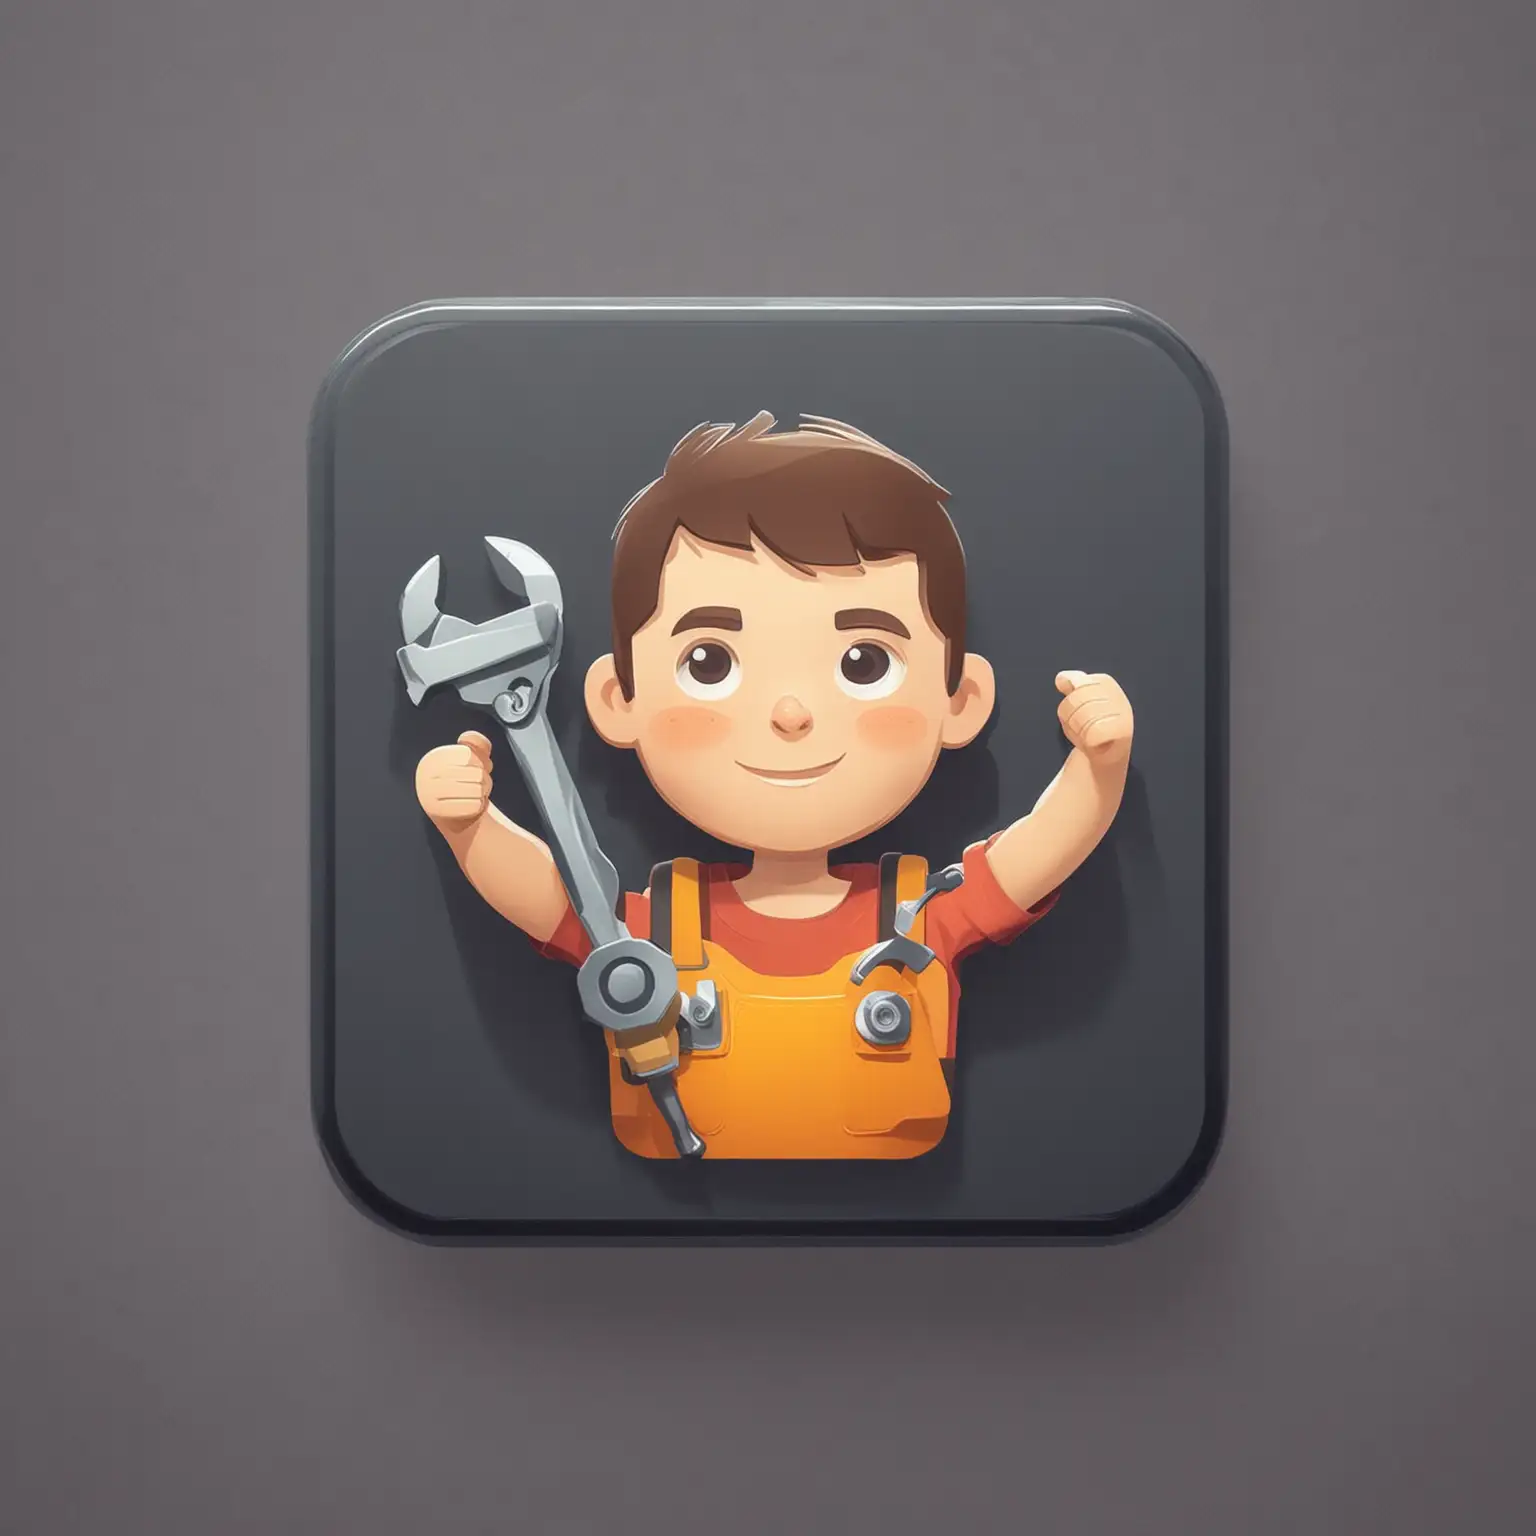 Mechanic-Boy-Holding-Wrench-Icon-in-Flat-Style